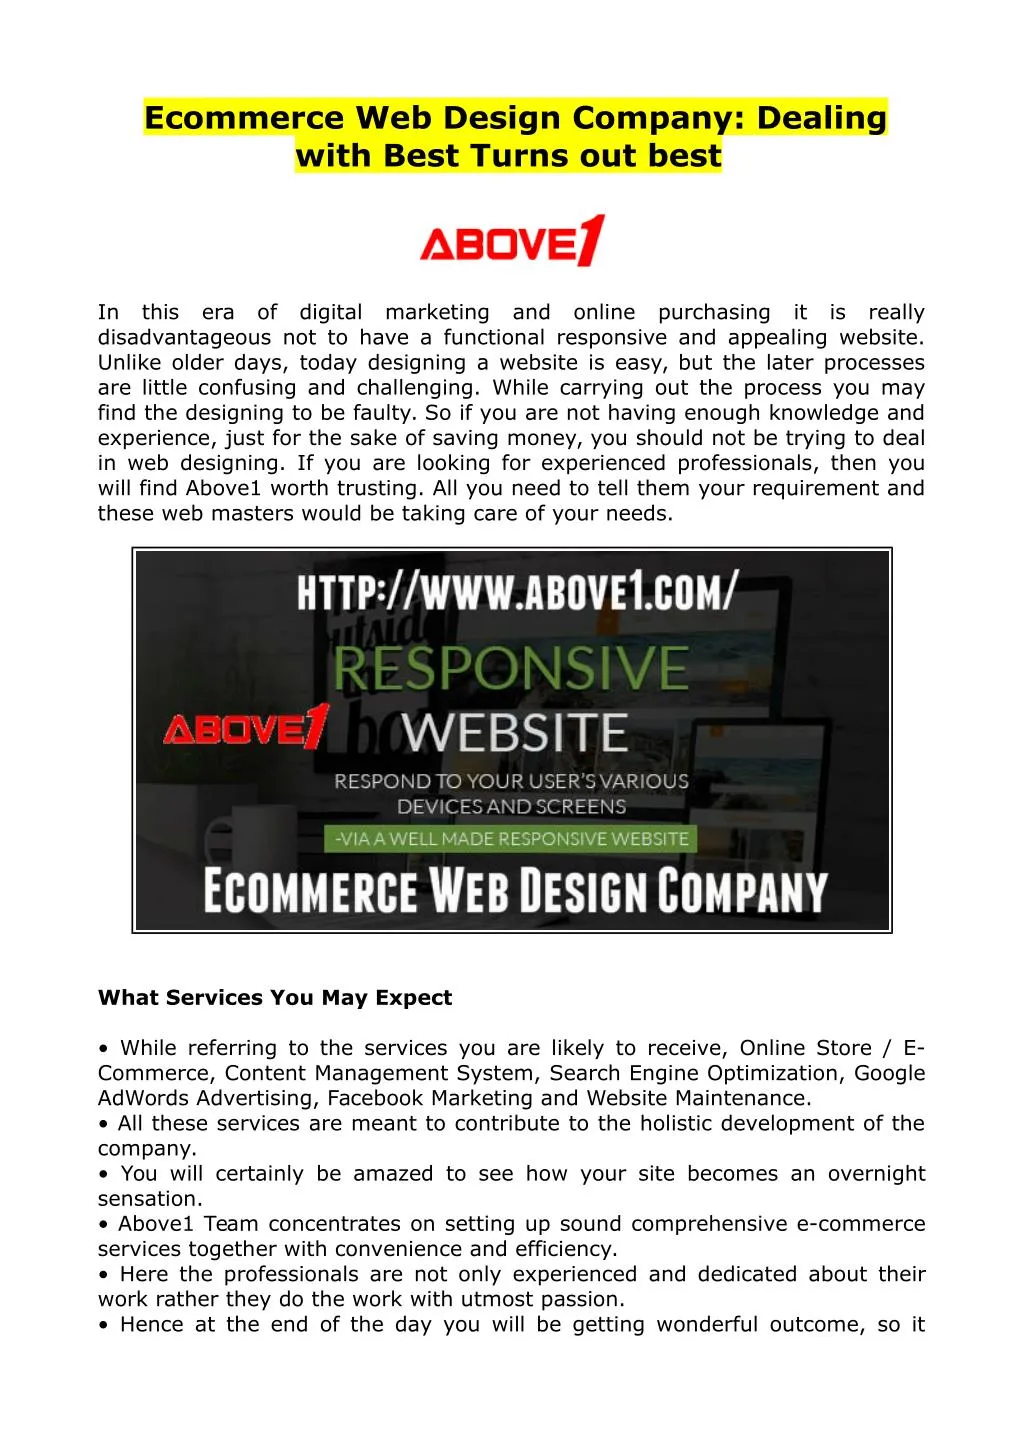 ecommerce web design company dealing with best